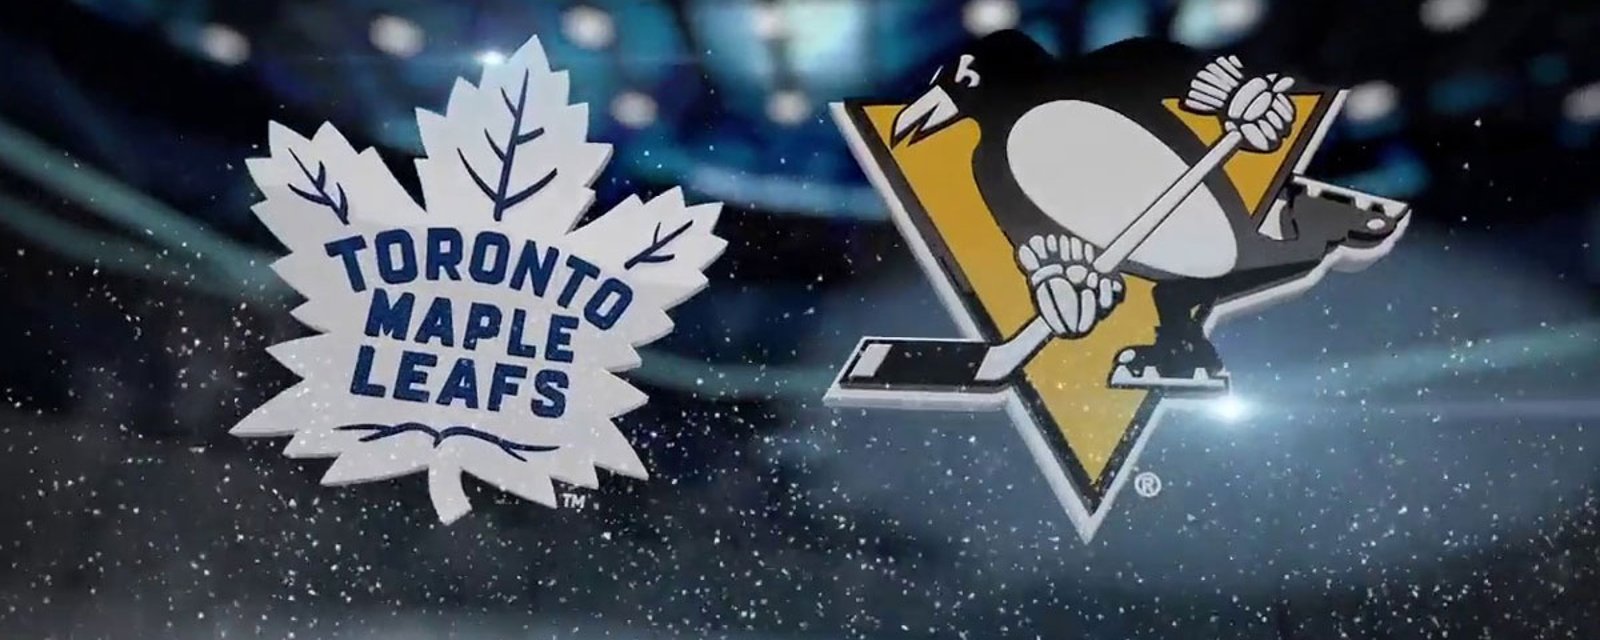 Rumor of a blockbuster deal between the Leafs and the Penguins